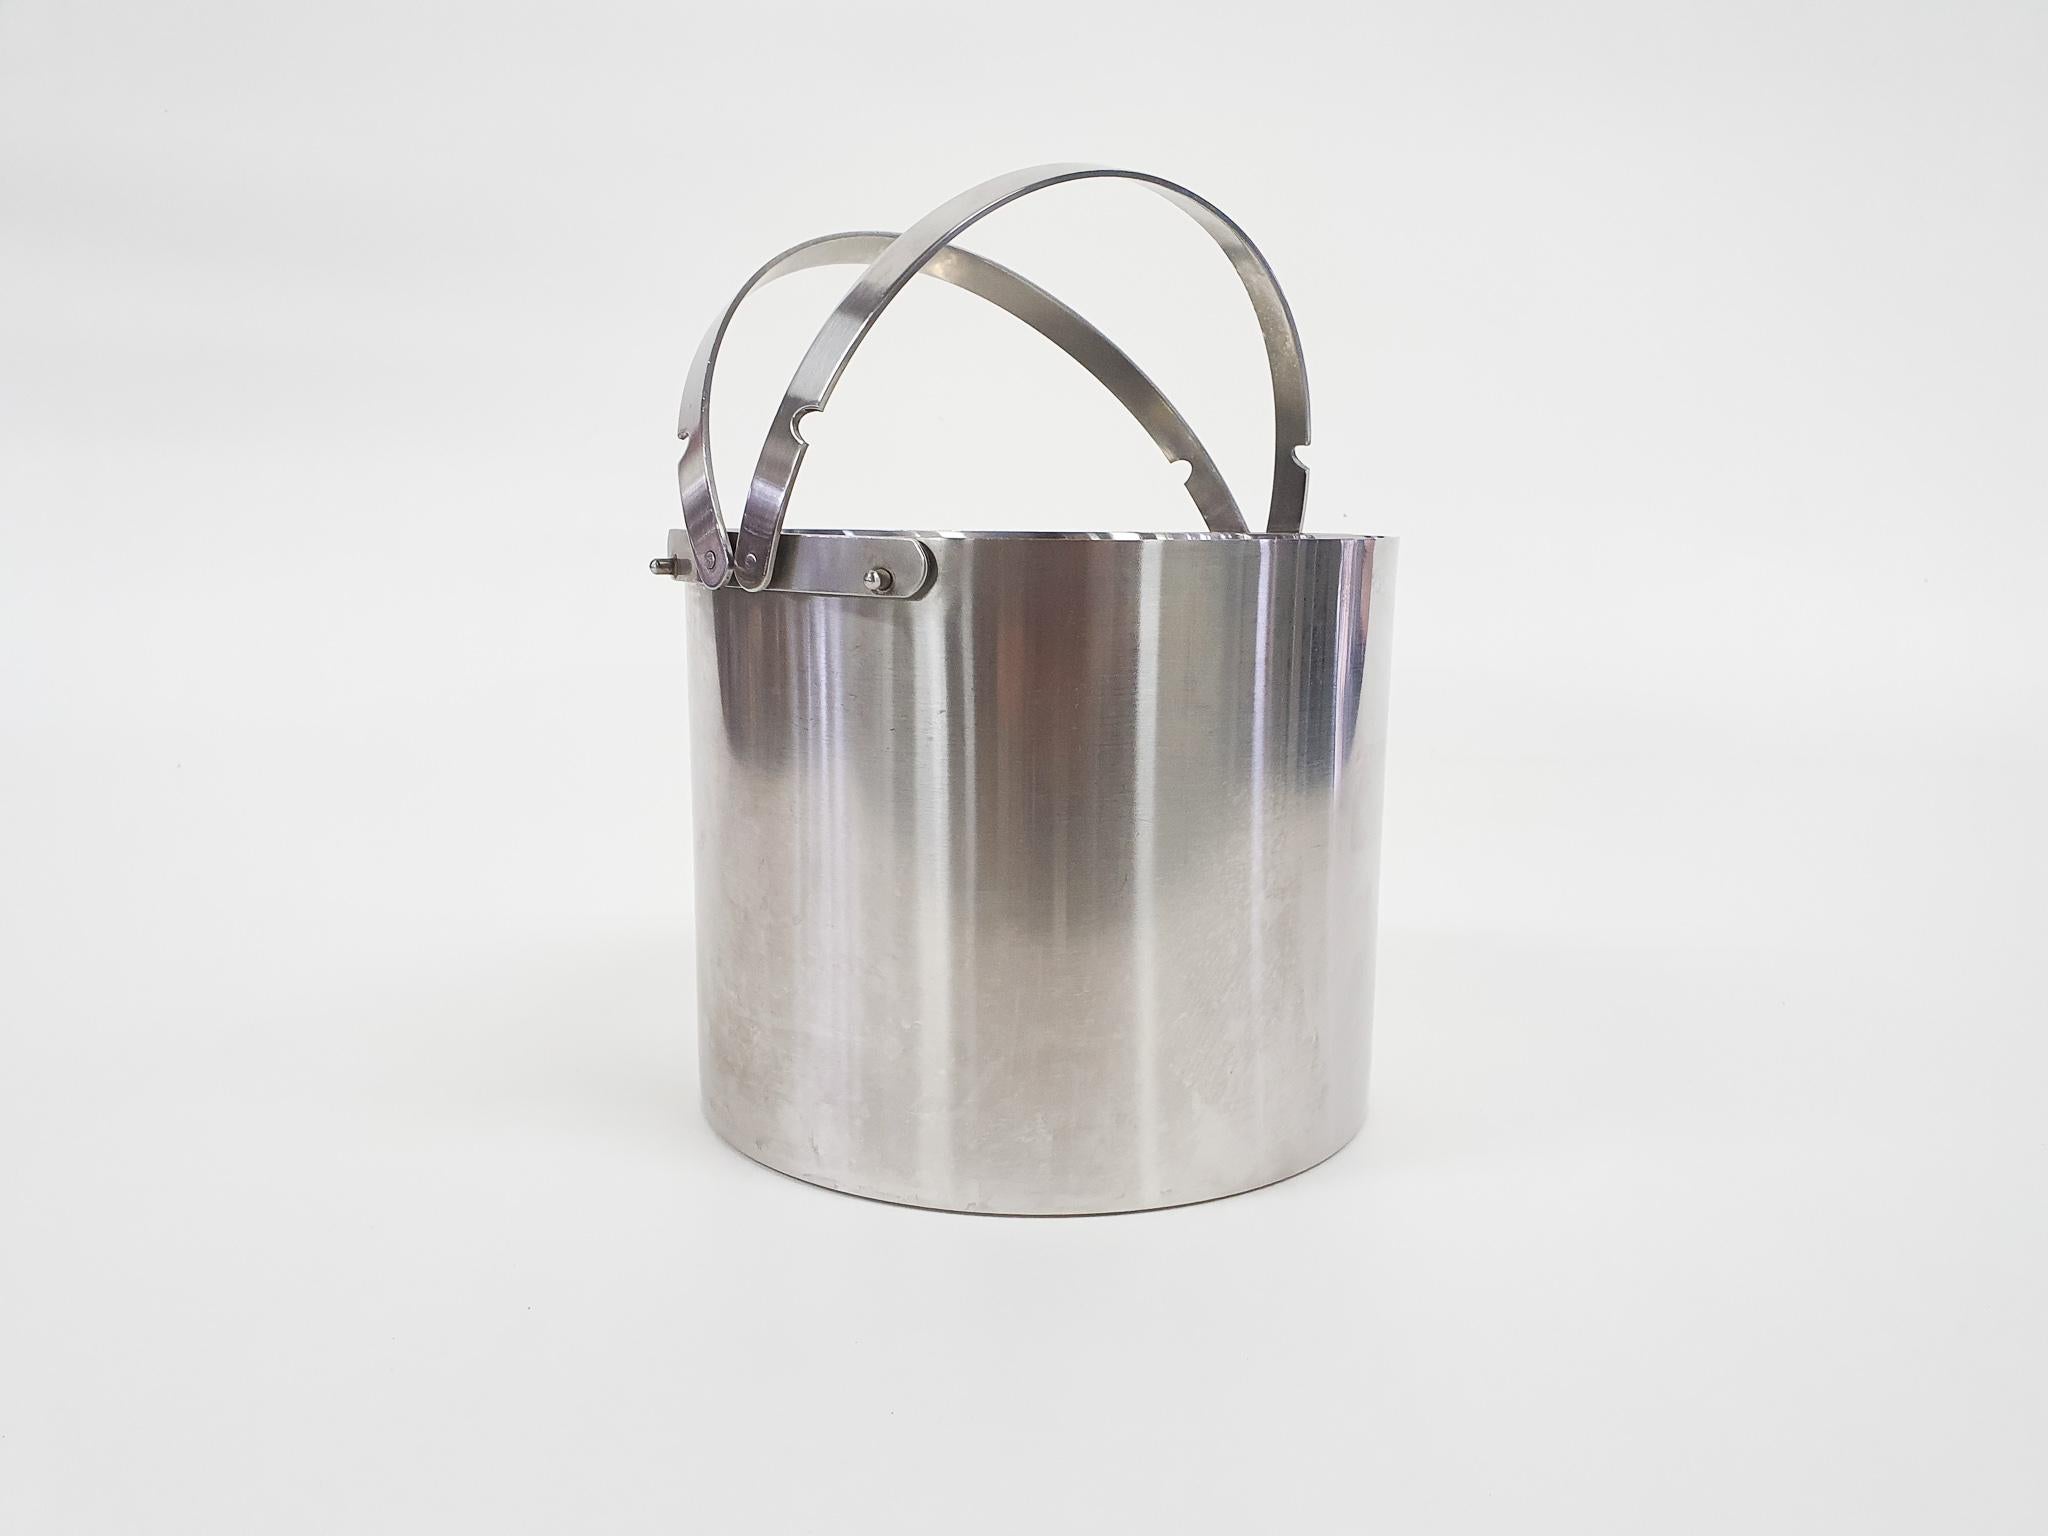 Stainless steel ice bucket designed by Arne Jacobsen for Stelton
Arne Jacobsen was a Danish architect and designer. He is remembered for his contribution to architectural Functionalism. He was succesfull with his simple but effective chair designs.